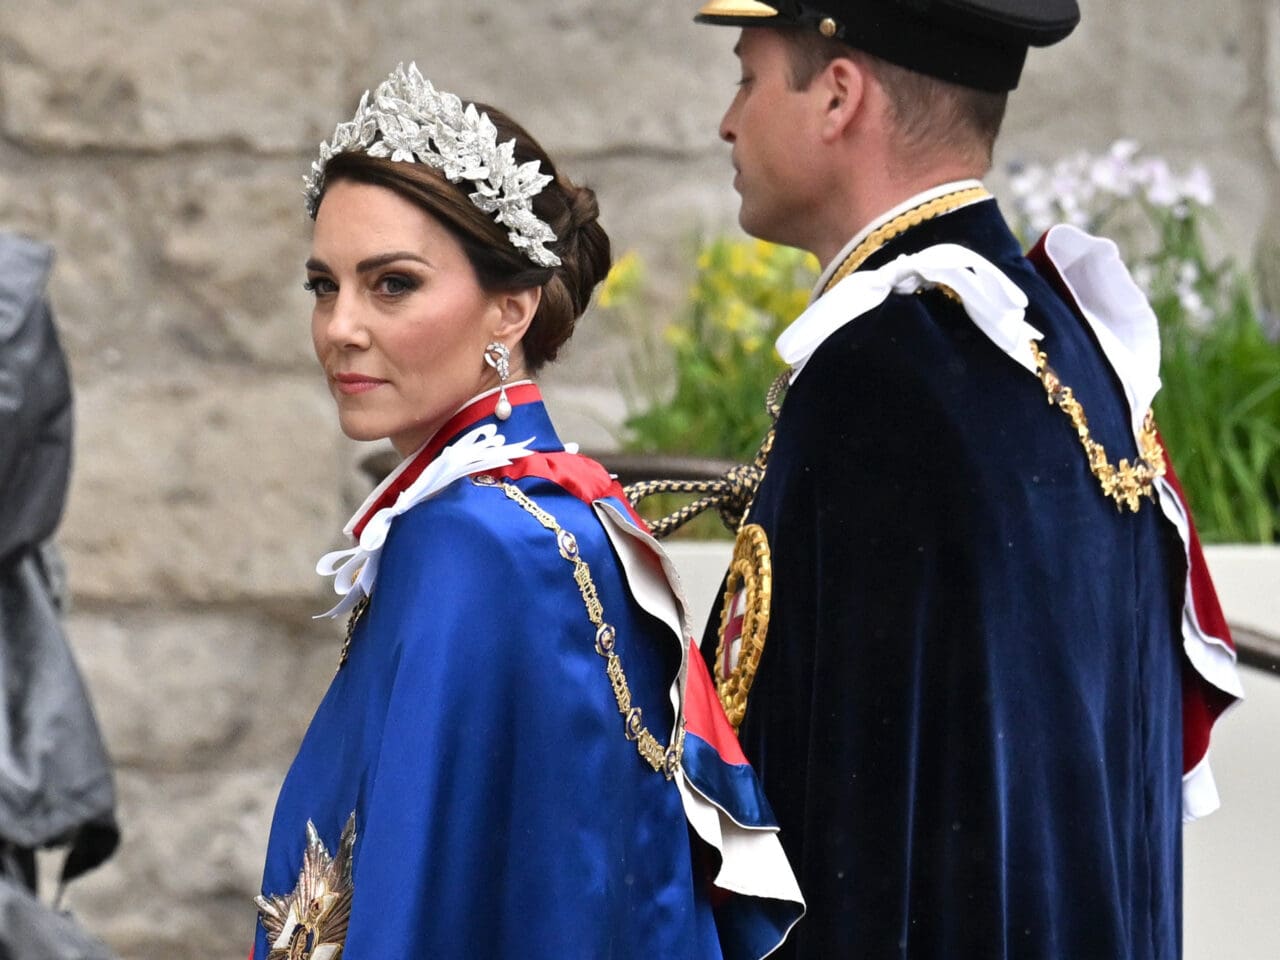 The Princess Of Wales’s Alexander McQueen Coronation Gown